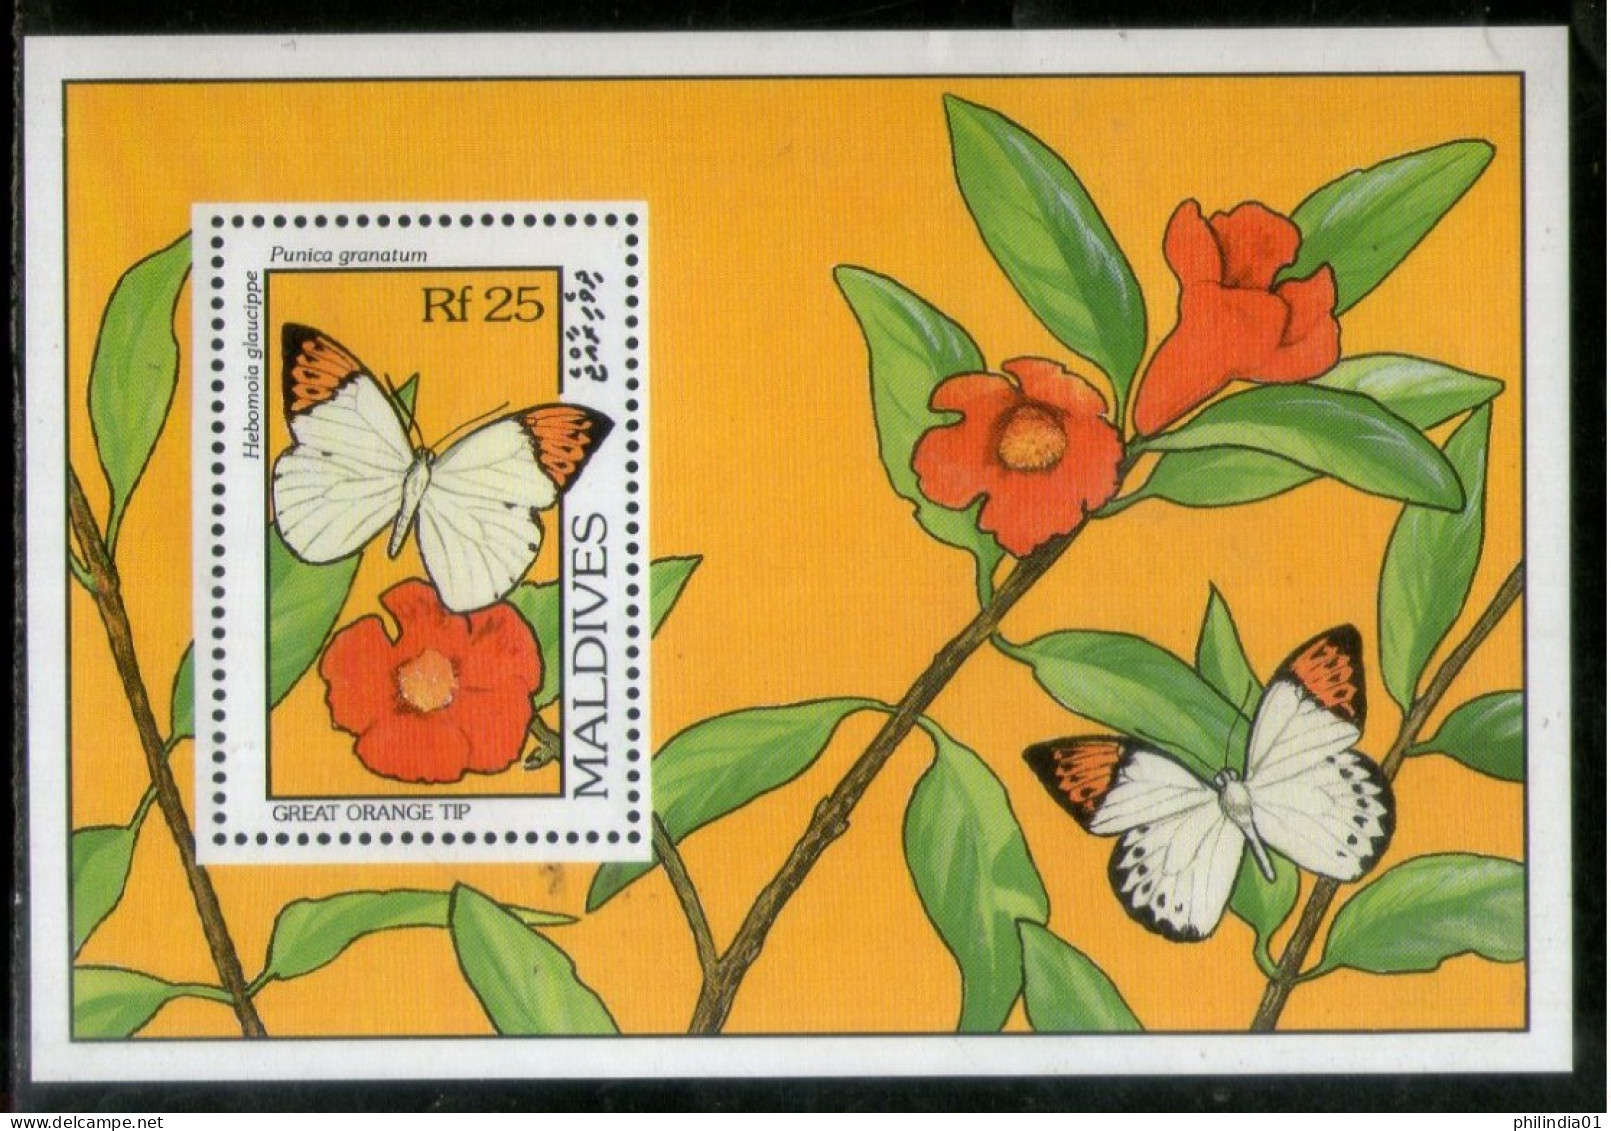 Maldives 1993 Great Orange Tip Butterflies & Flowers Moth Insect Sc 1906 M/s MNH # 5843 - Papillons